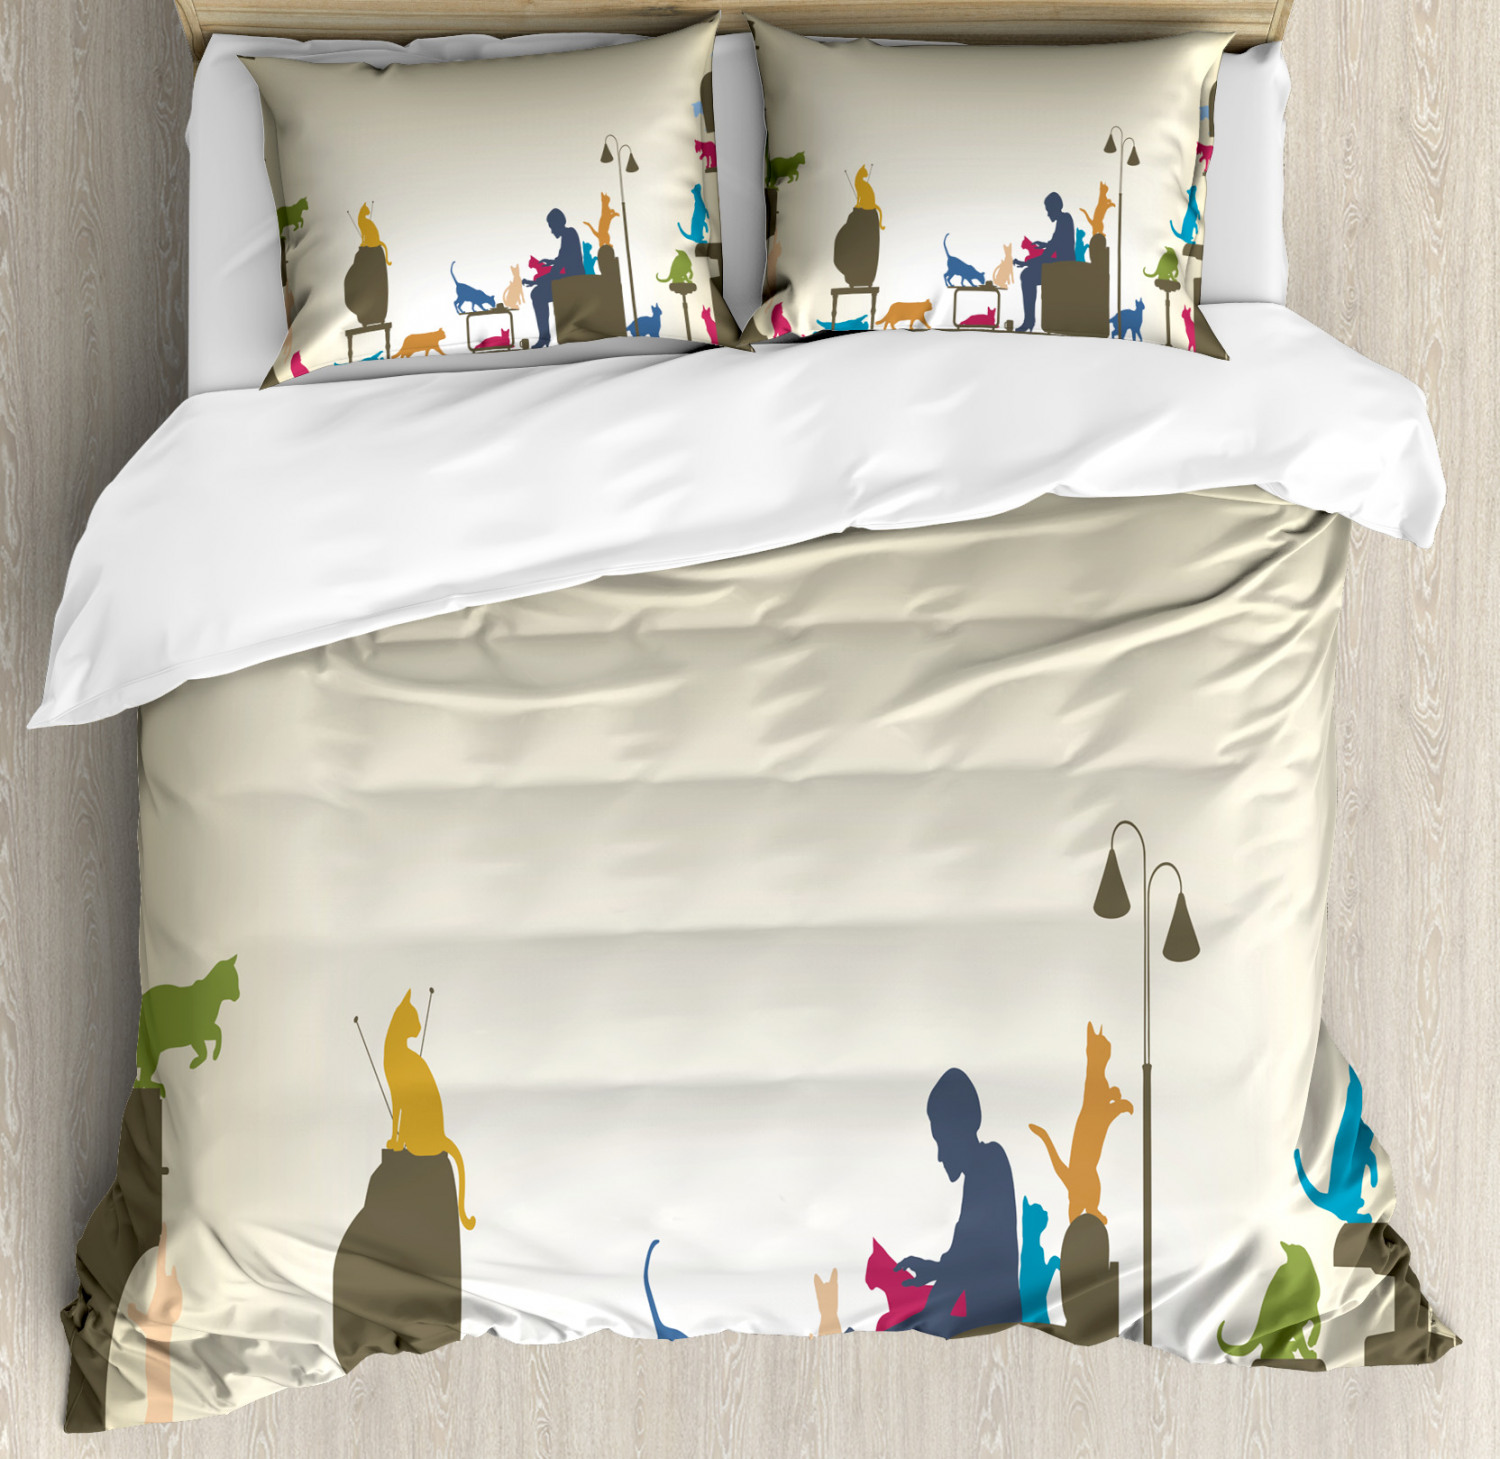 Crazy Cat Lady Home Print Details about   Multicolor Quilted Bedspread & Pillow Shams Set 